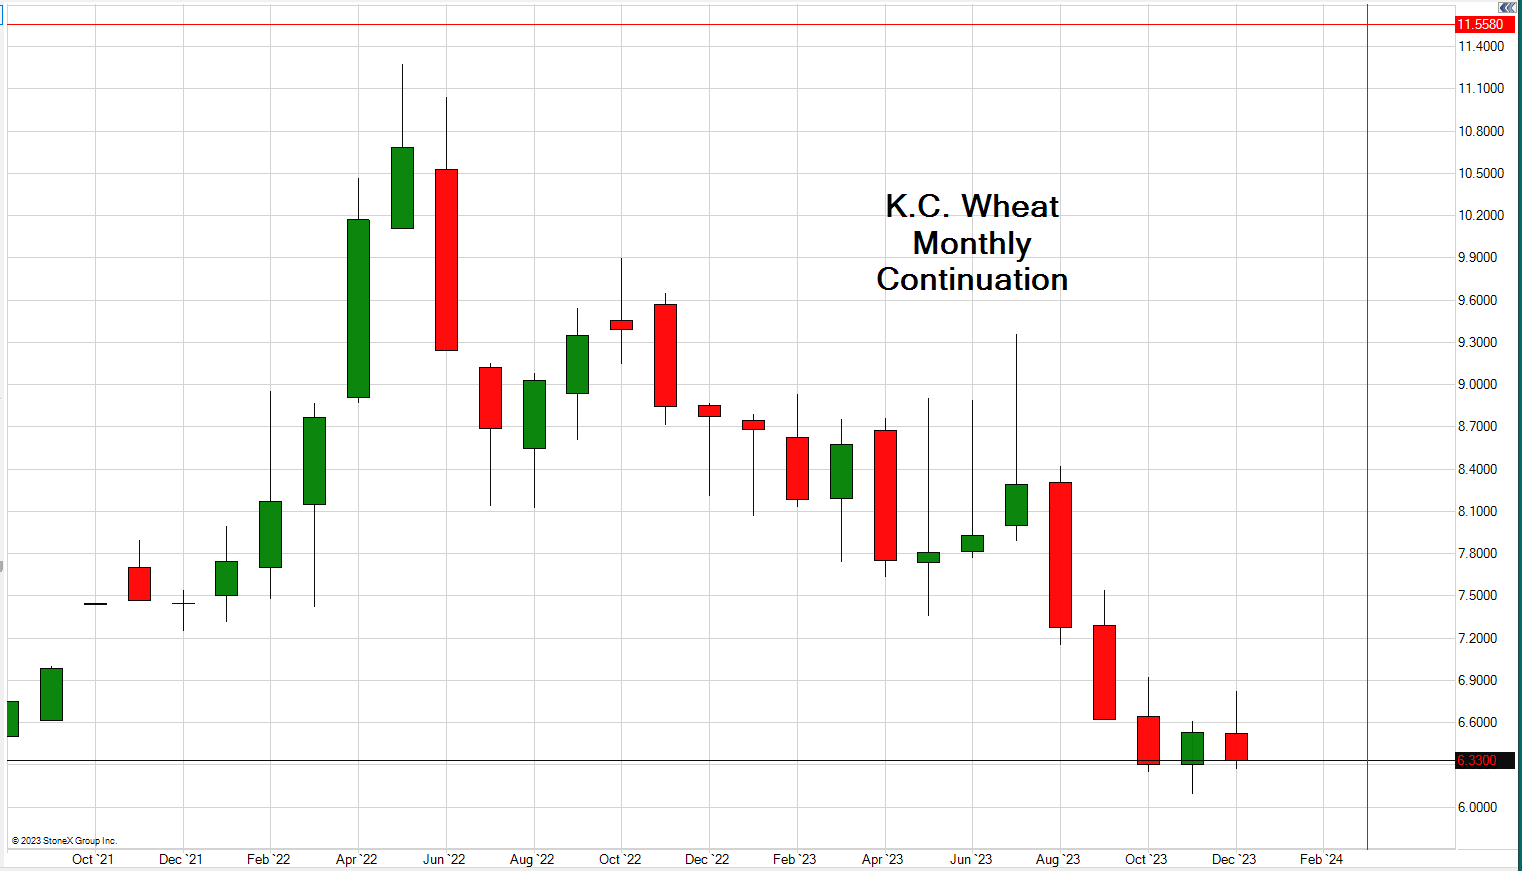 KCBT Red Wheat Futures Trading Chart updated March 3rd, 2022